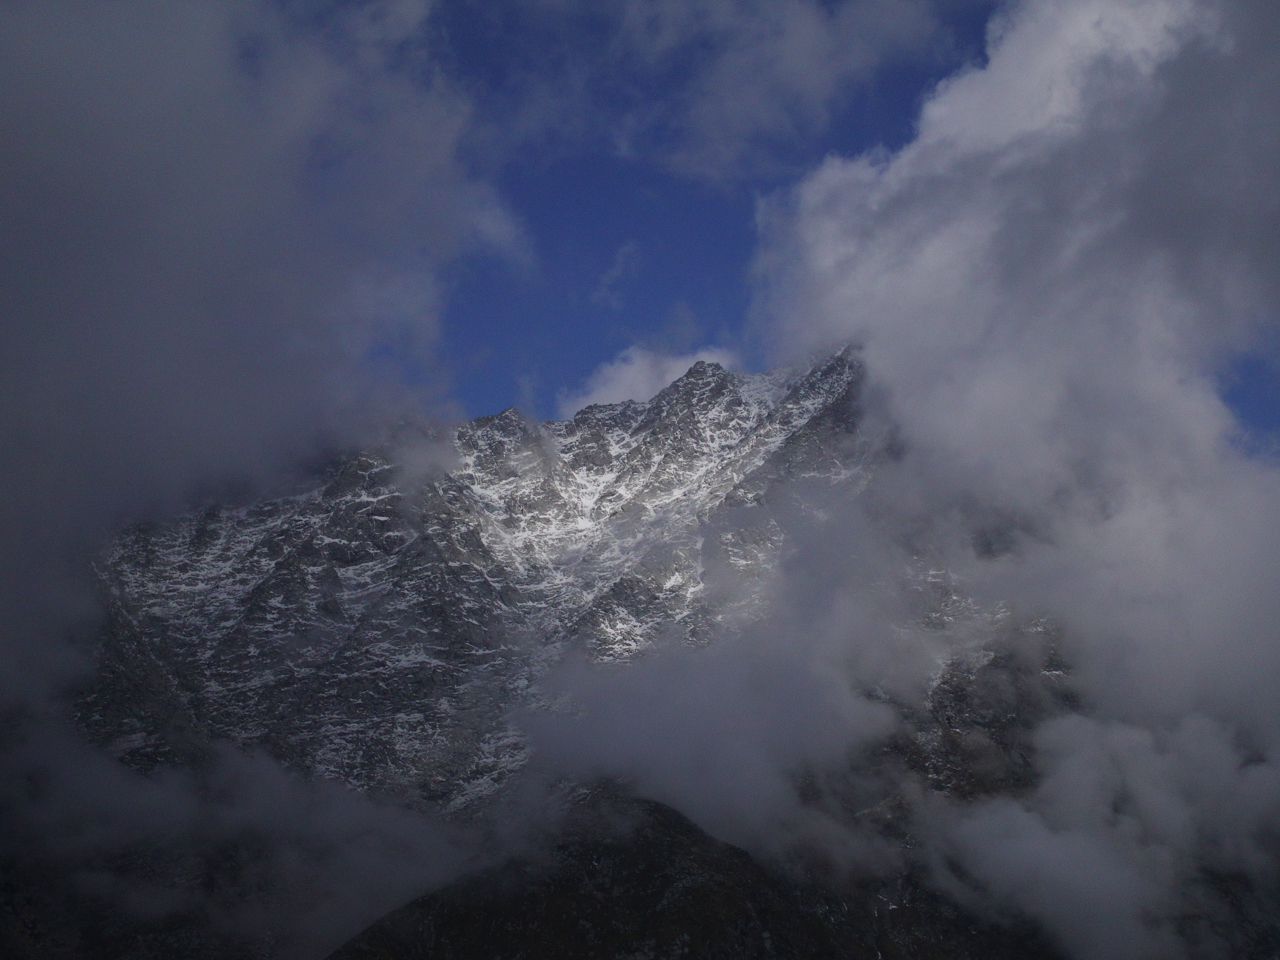 Even though these mountains are part of the lower Himalayans they already rise up to over 5000m in elevation.